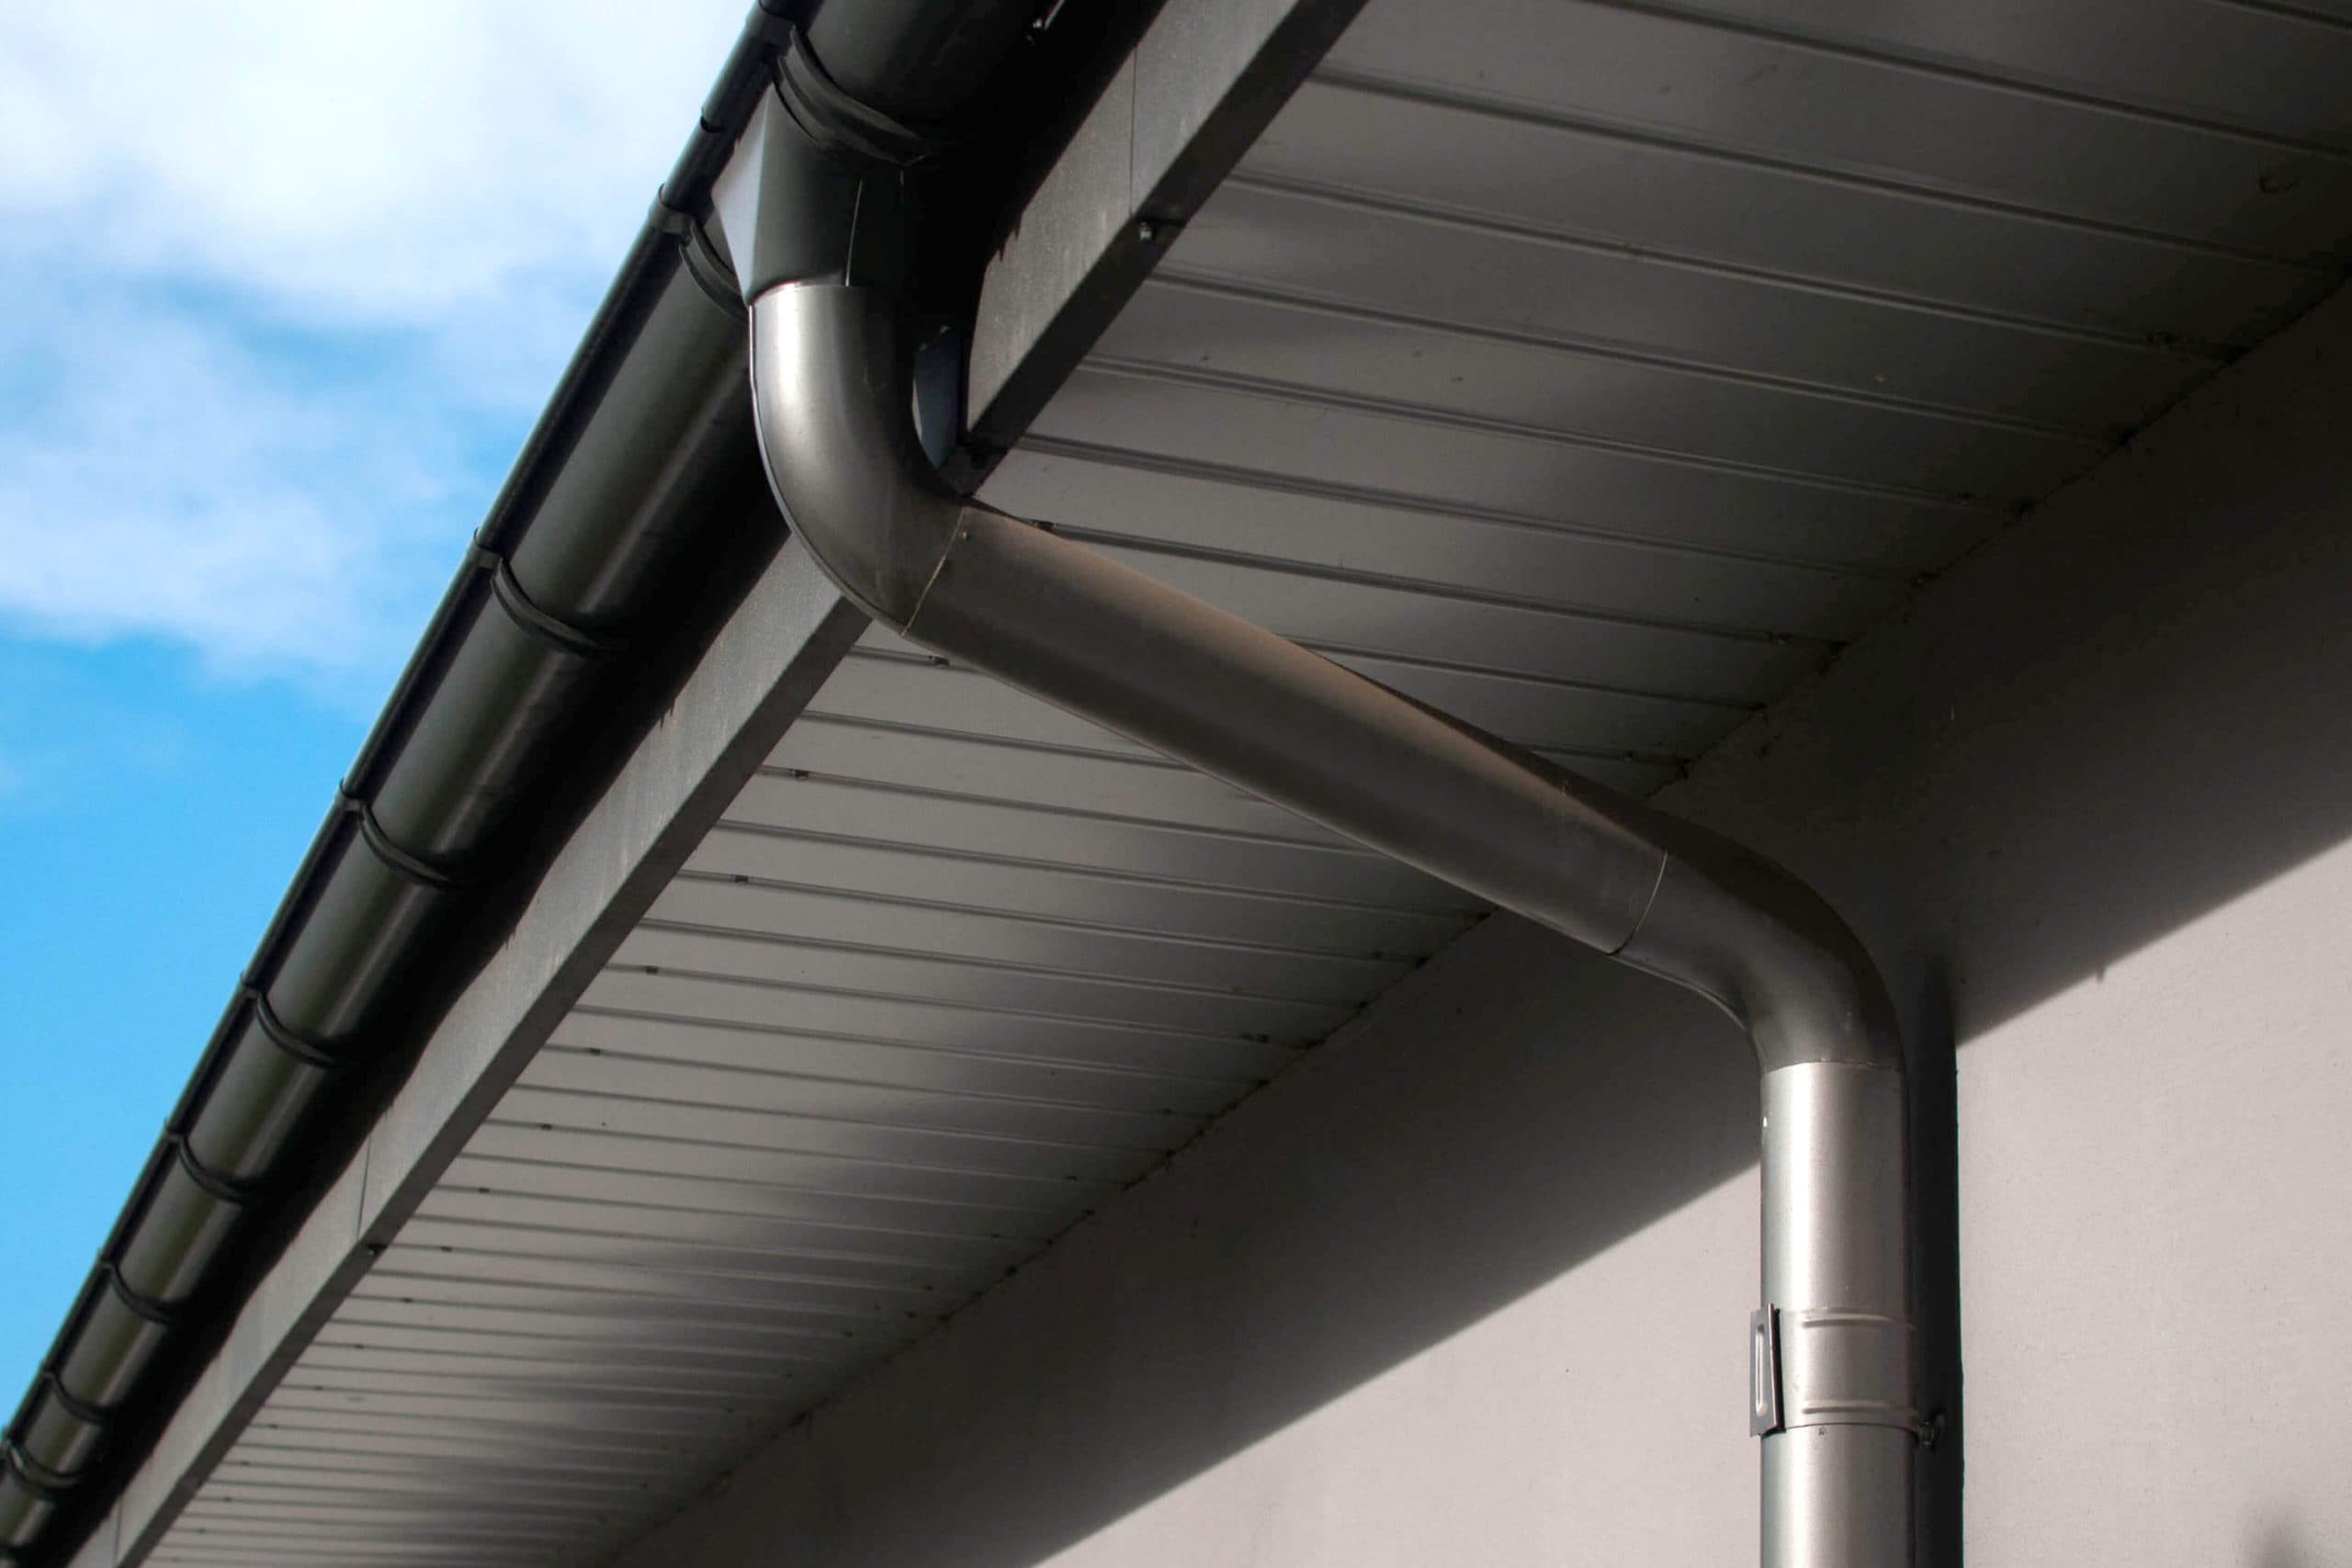 Corrosion-resistant galvanized gutters installed on a commercial building in Winston Salem